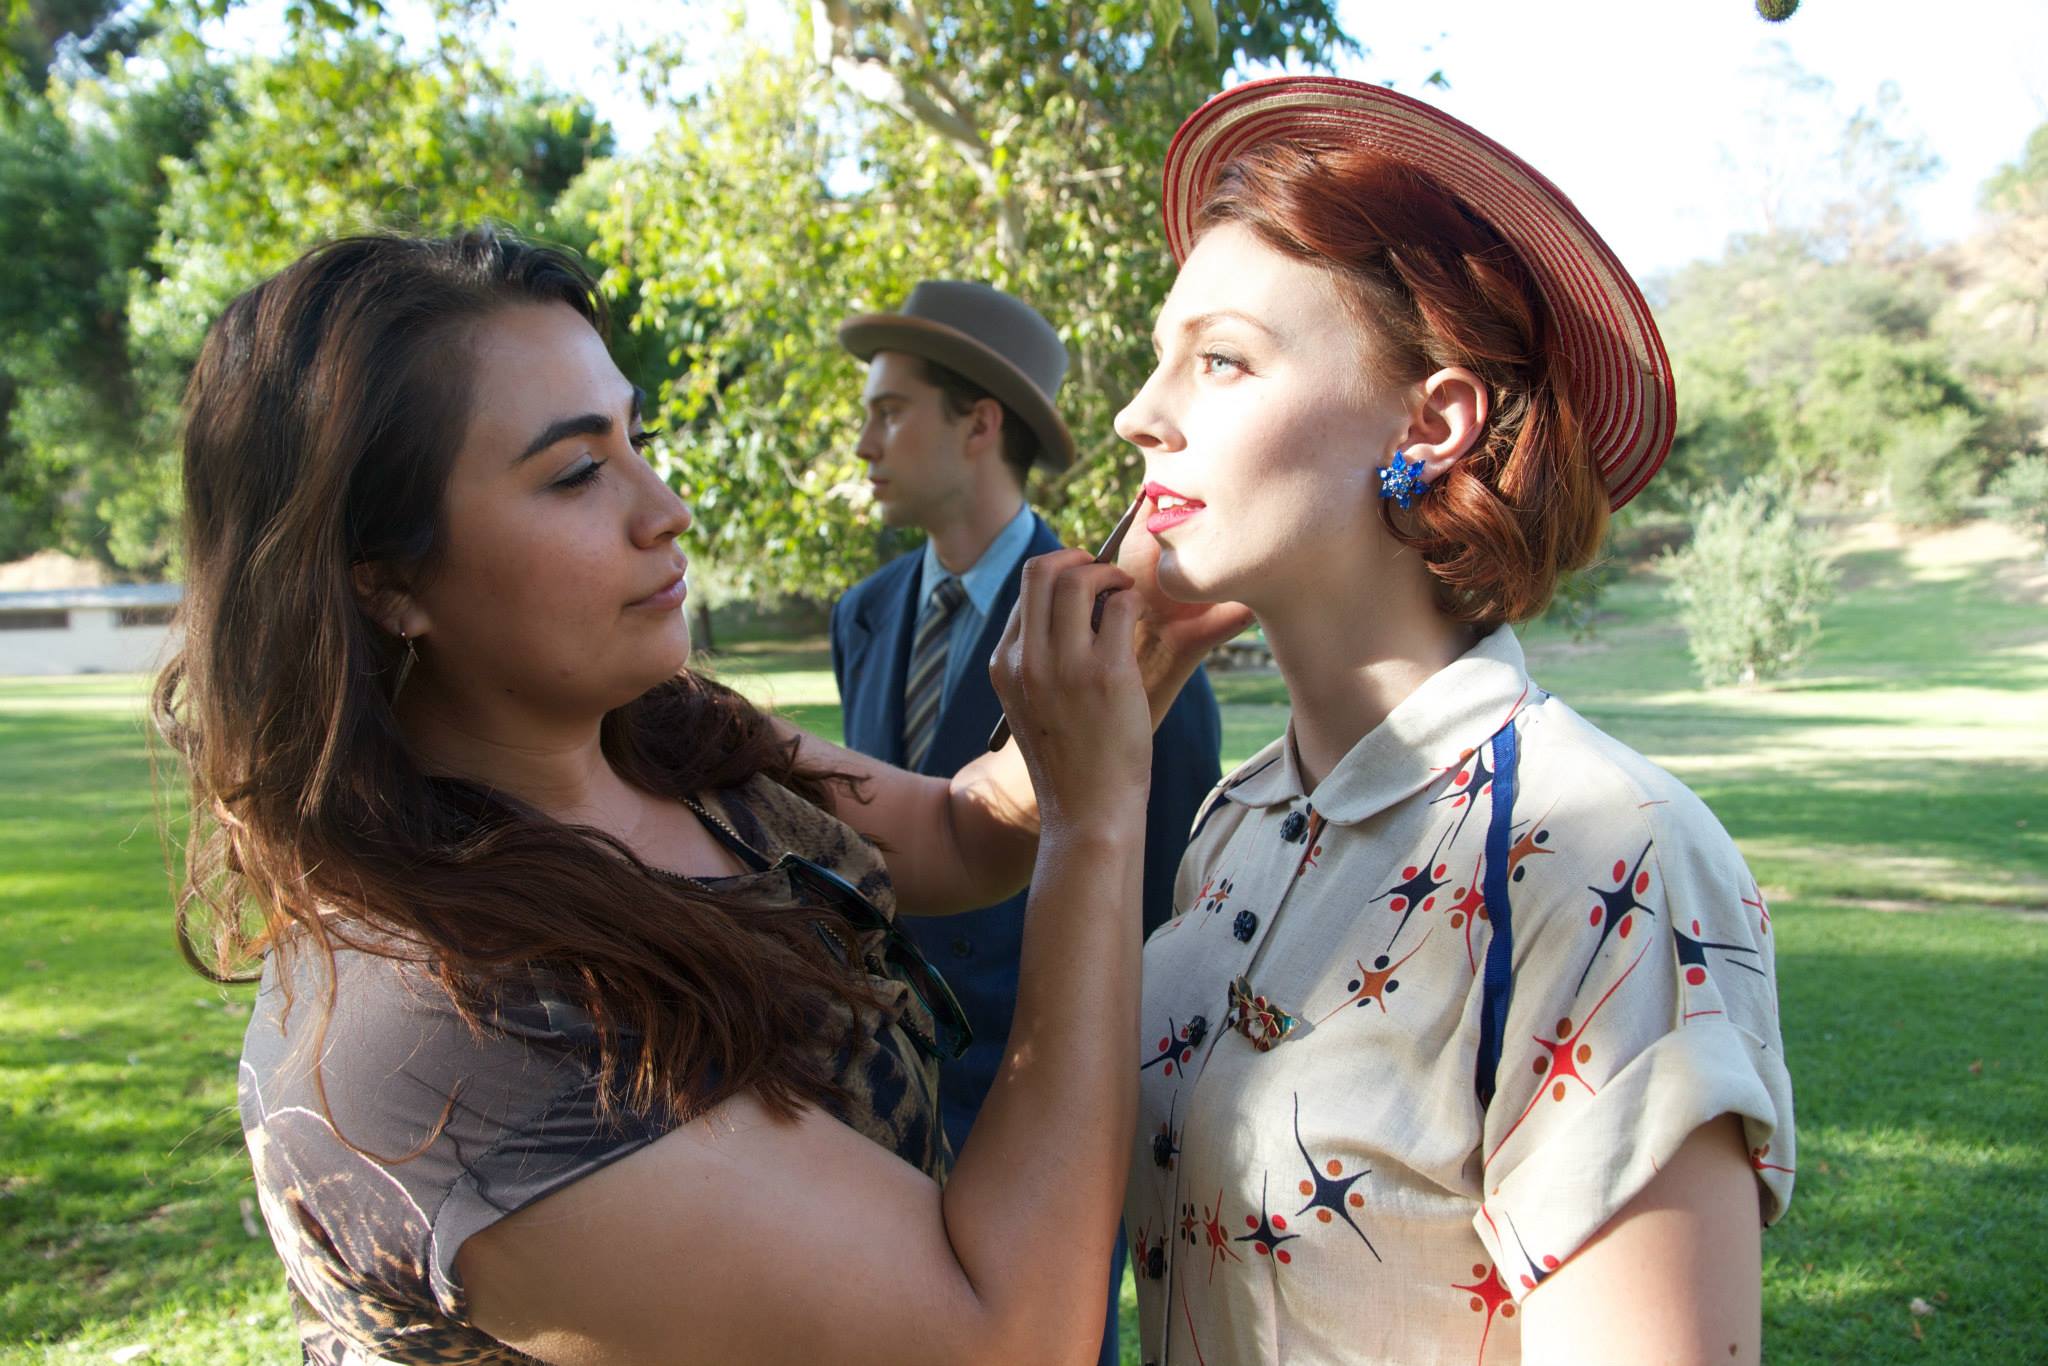 Touch ups on actress Emily Elizabeth Martz on the set of IN HER PROPPER PLACE